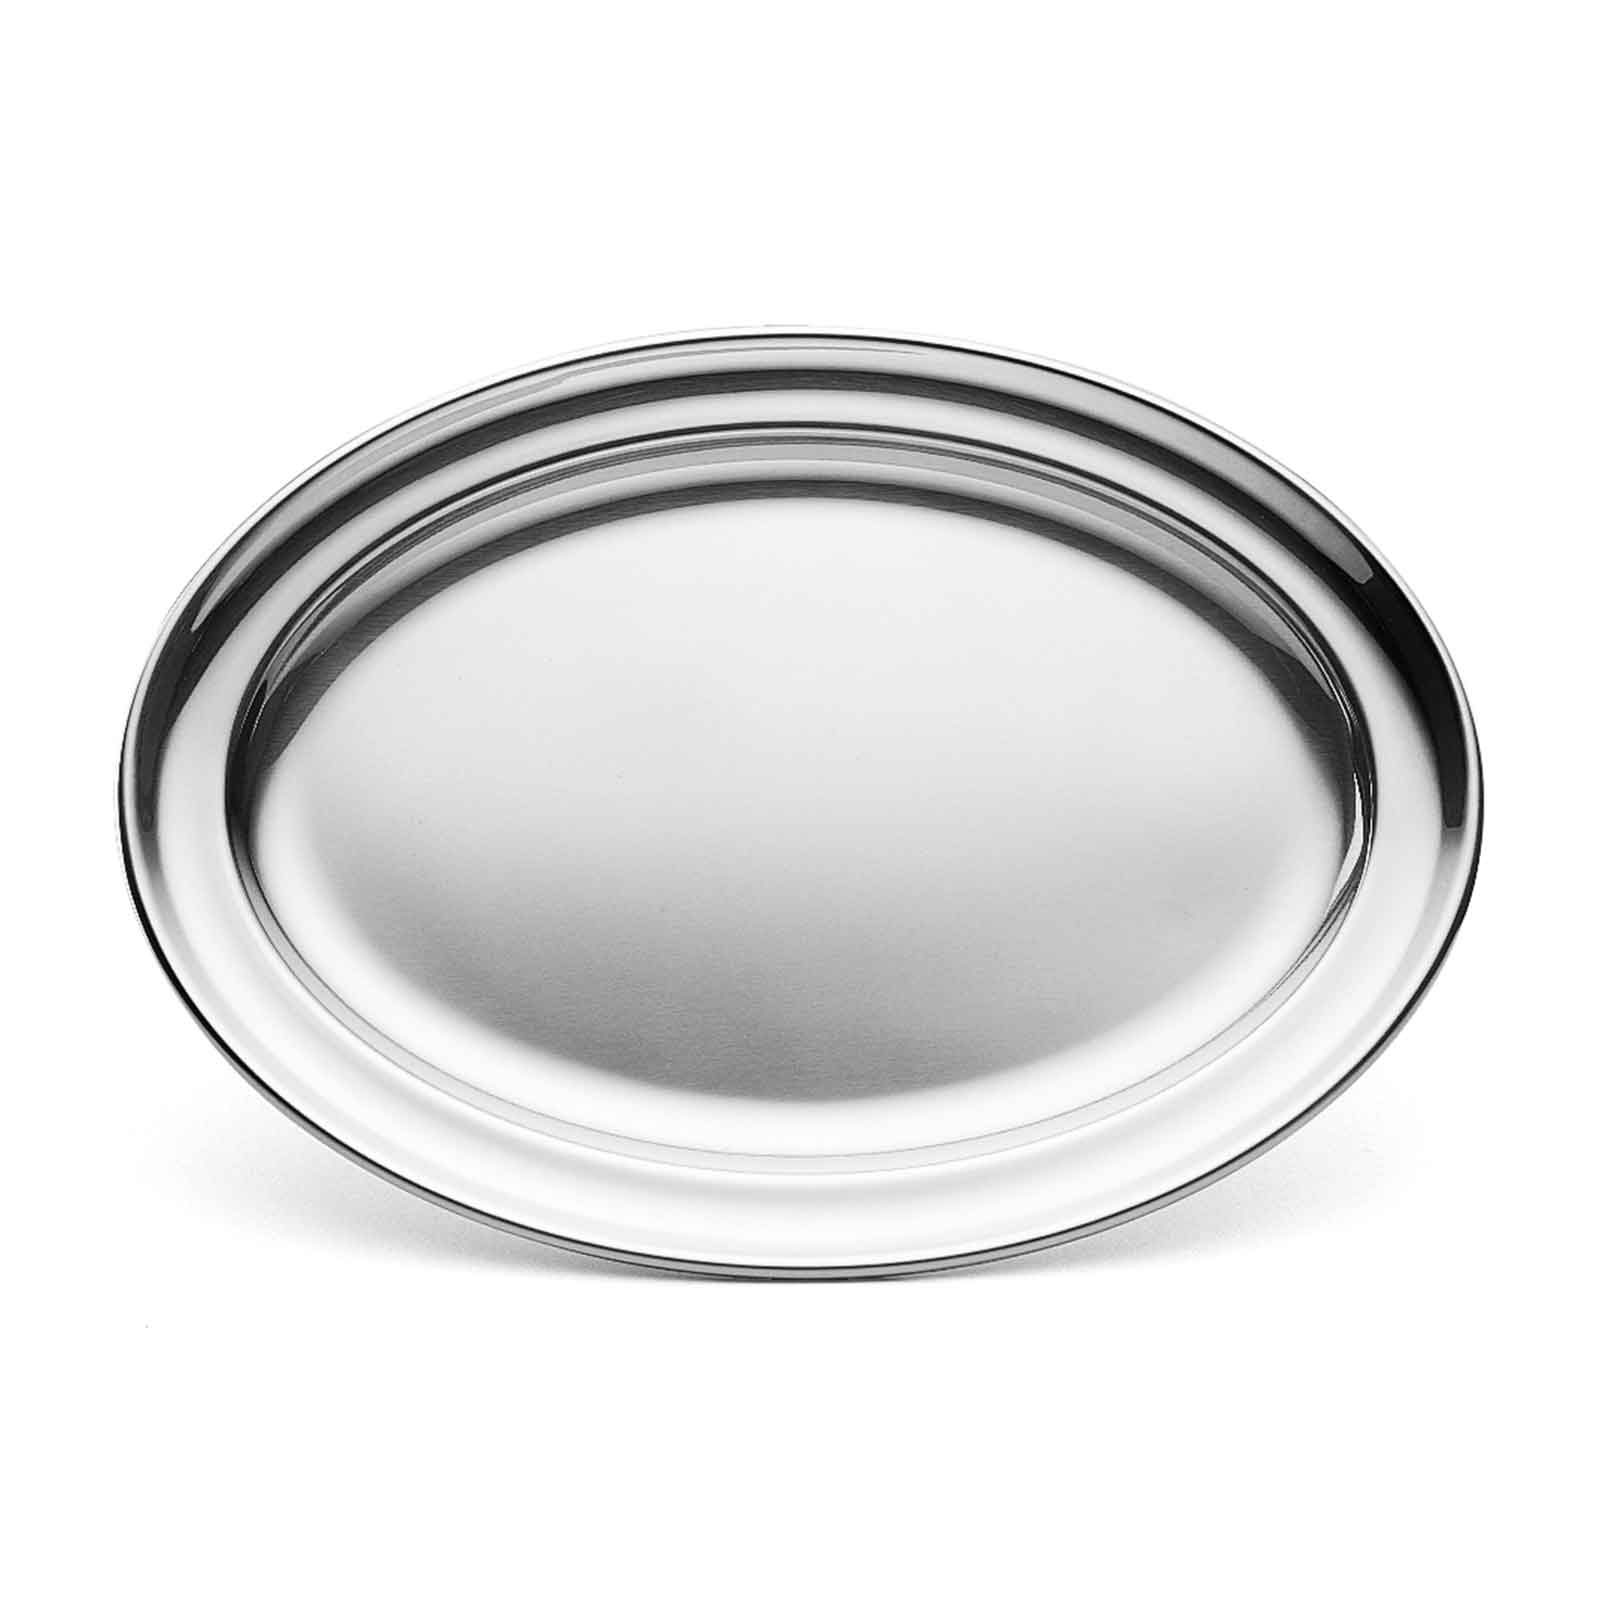 Walco Stainless O-U12 Tray, Serving